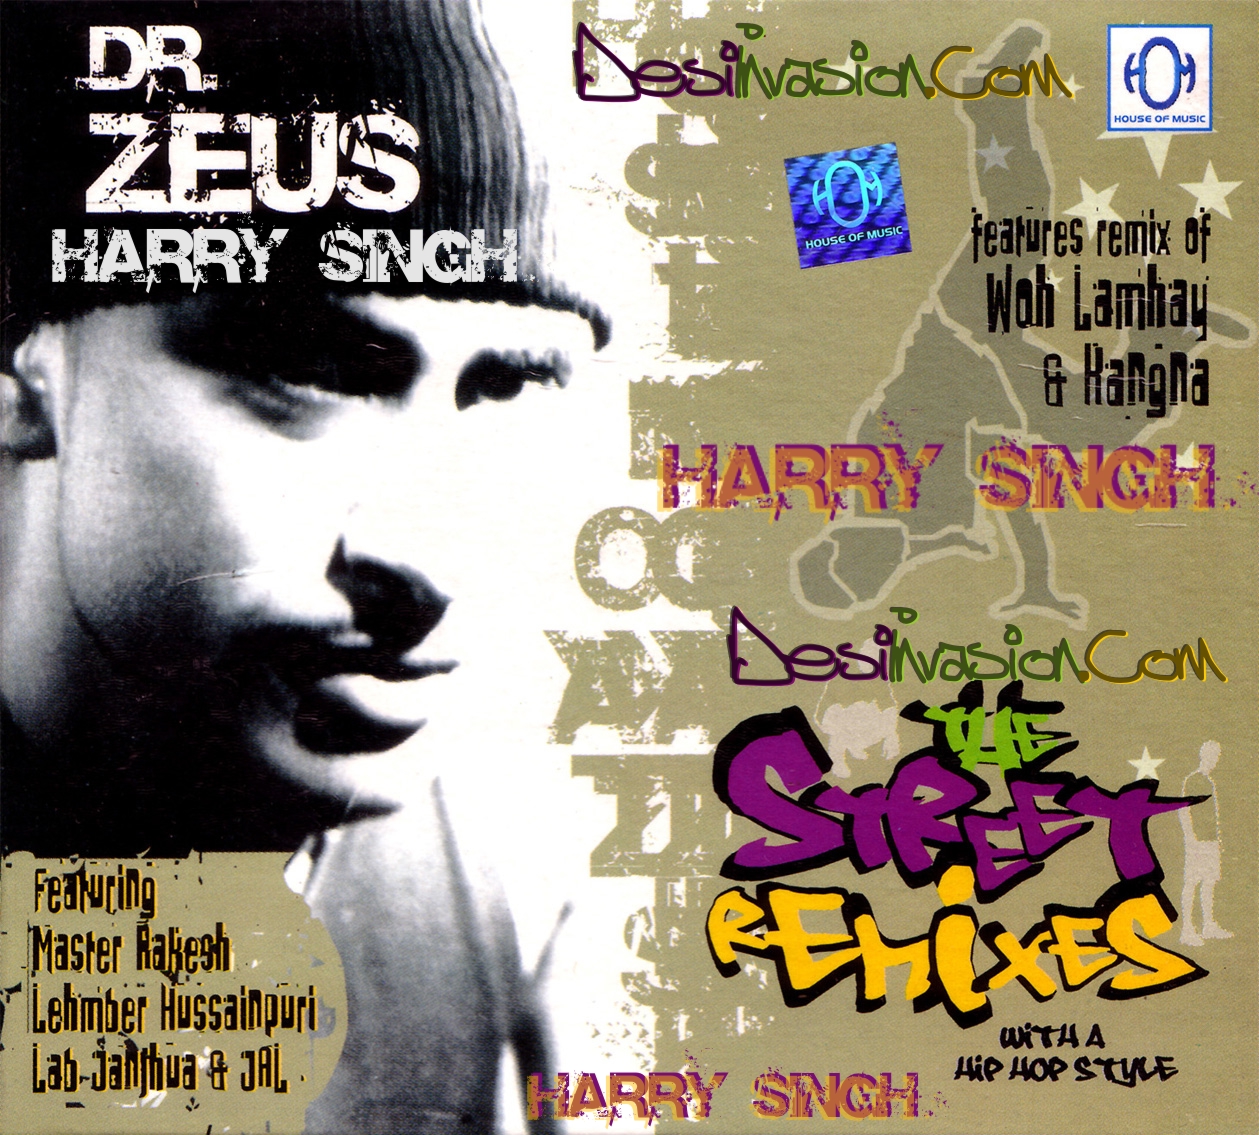 [00+-+The+Street+Remixes+-+Indian+Release+-+Front+Cover+(By.HarrySingh)+[DesiInvasion.Com].jpg]